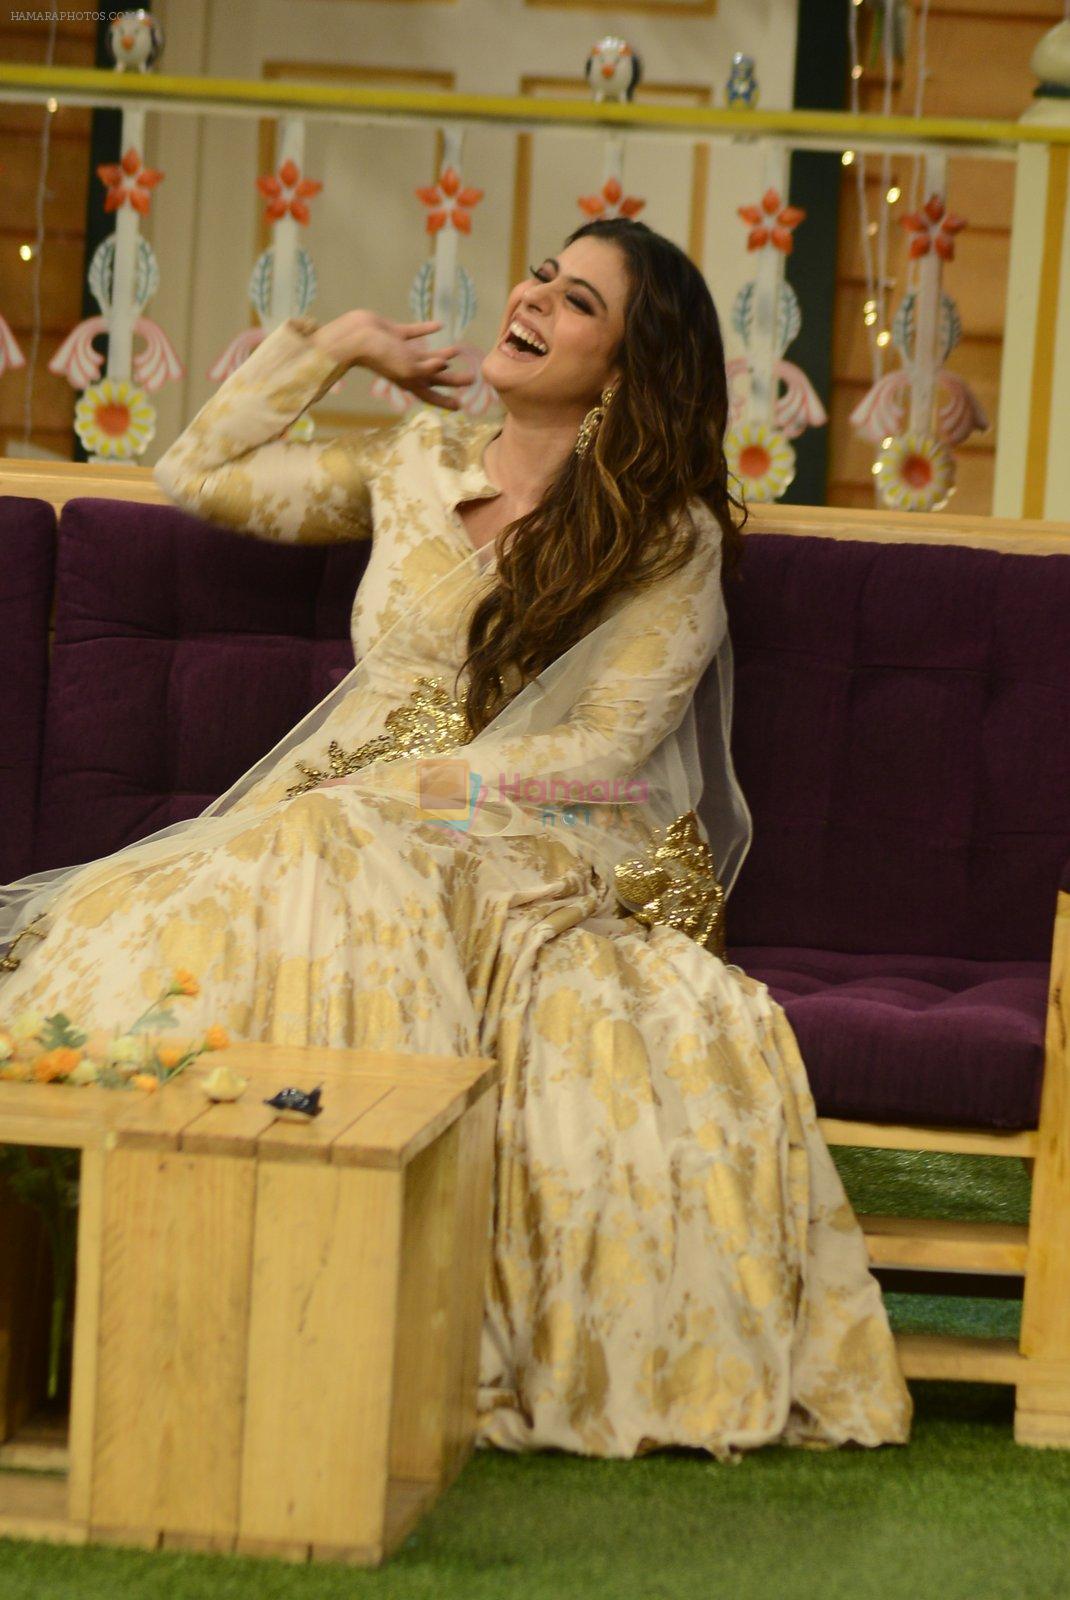 Kajol promote Shivaay on the sets of The Kapil Sharma Show on 22nd Oct 2016